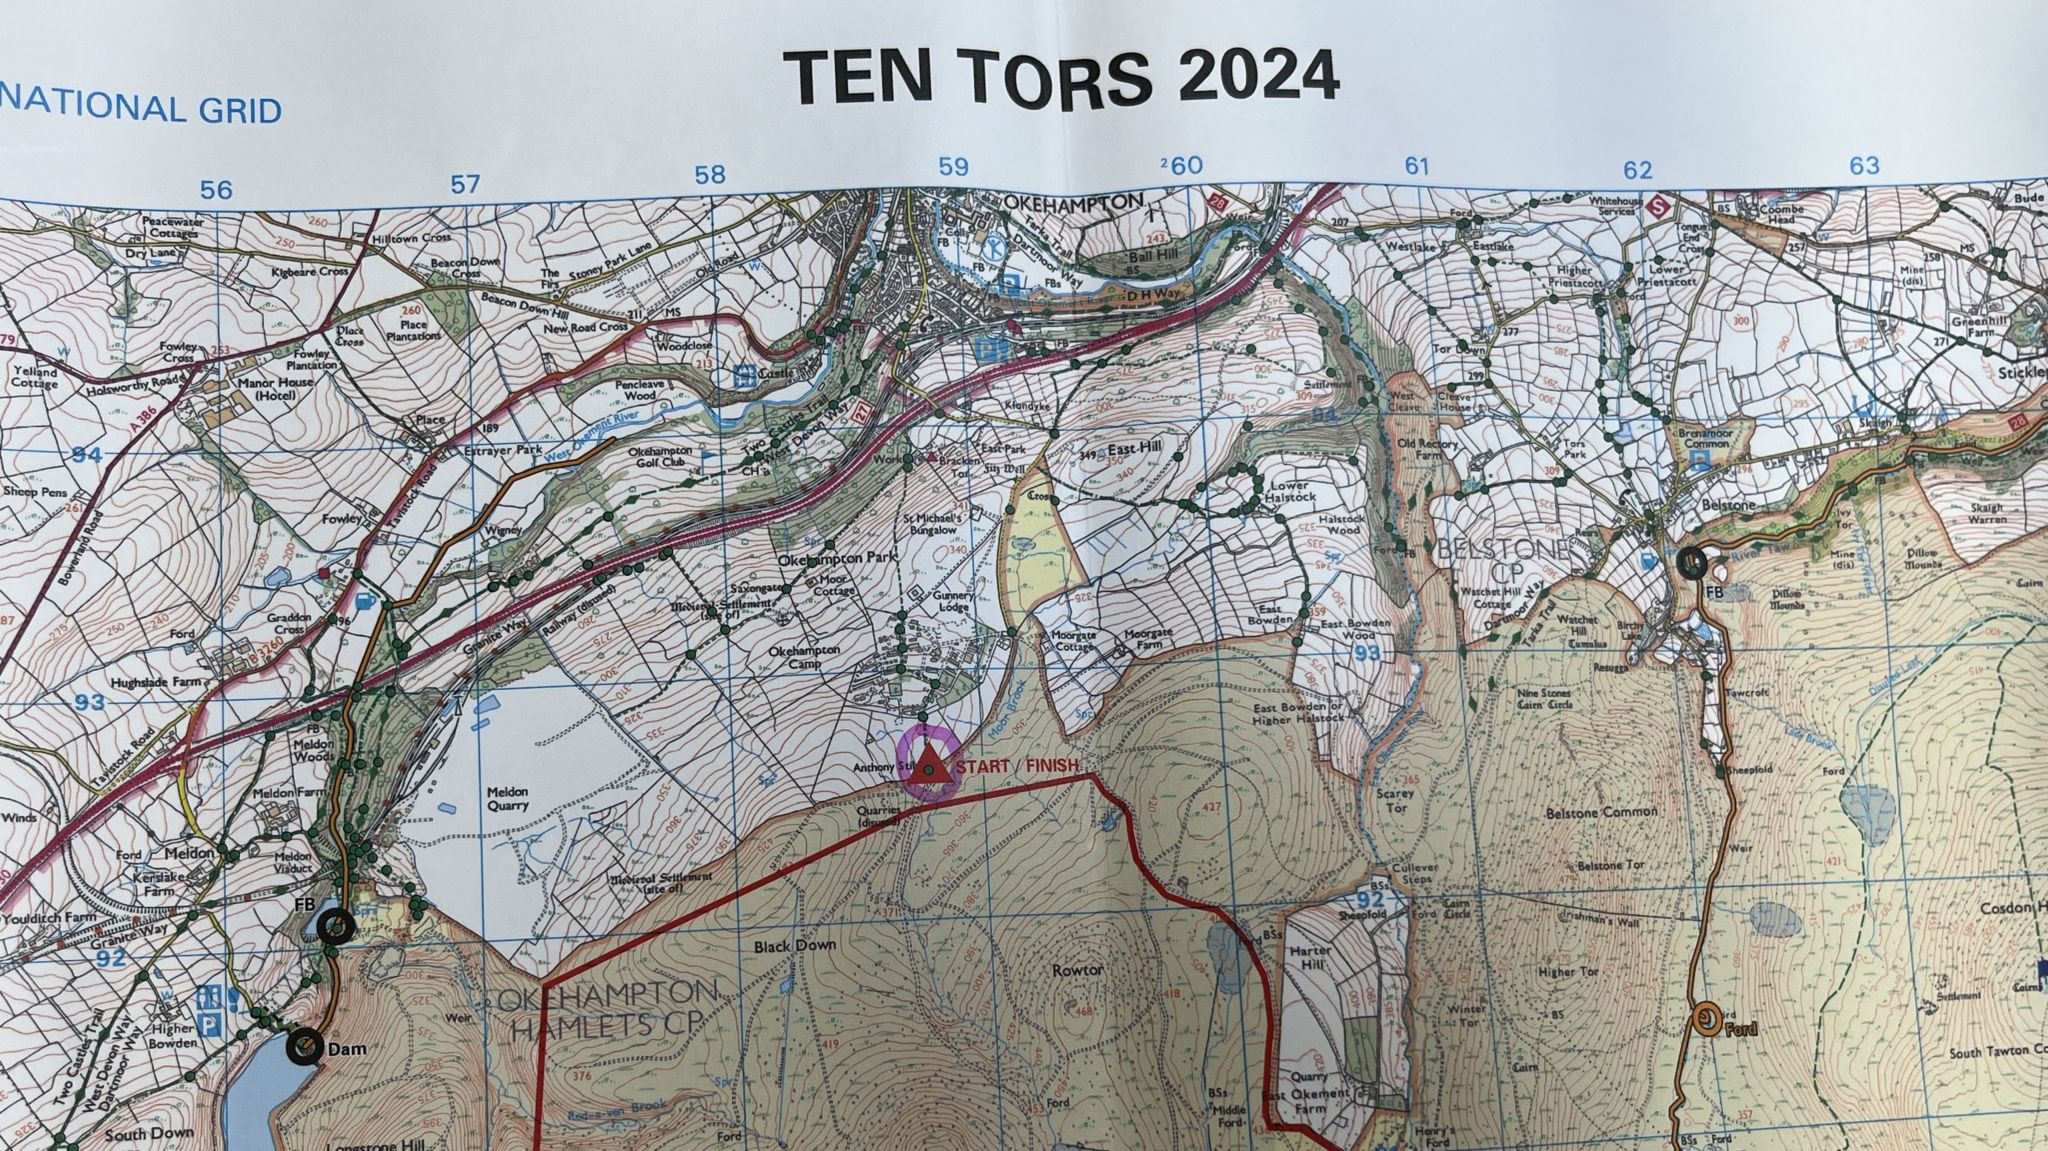 OS map with the title TEN TORS 2024 printed at the top